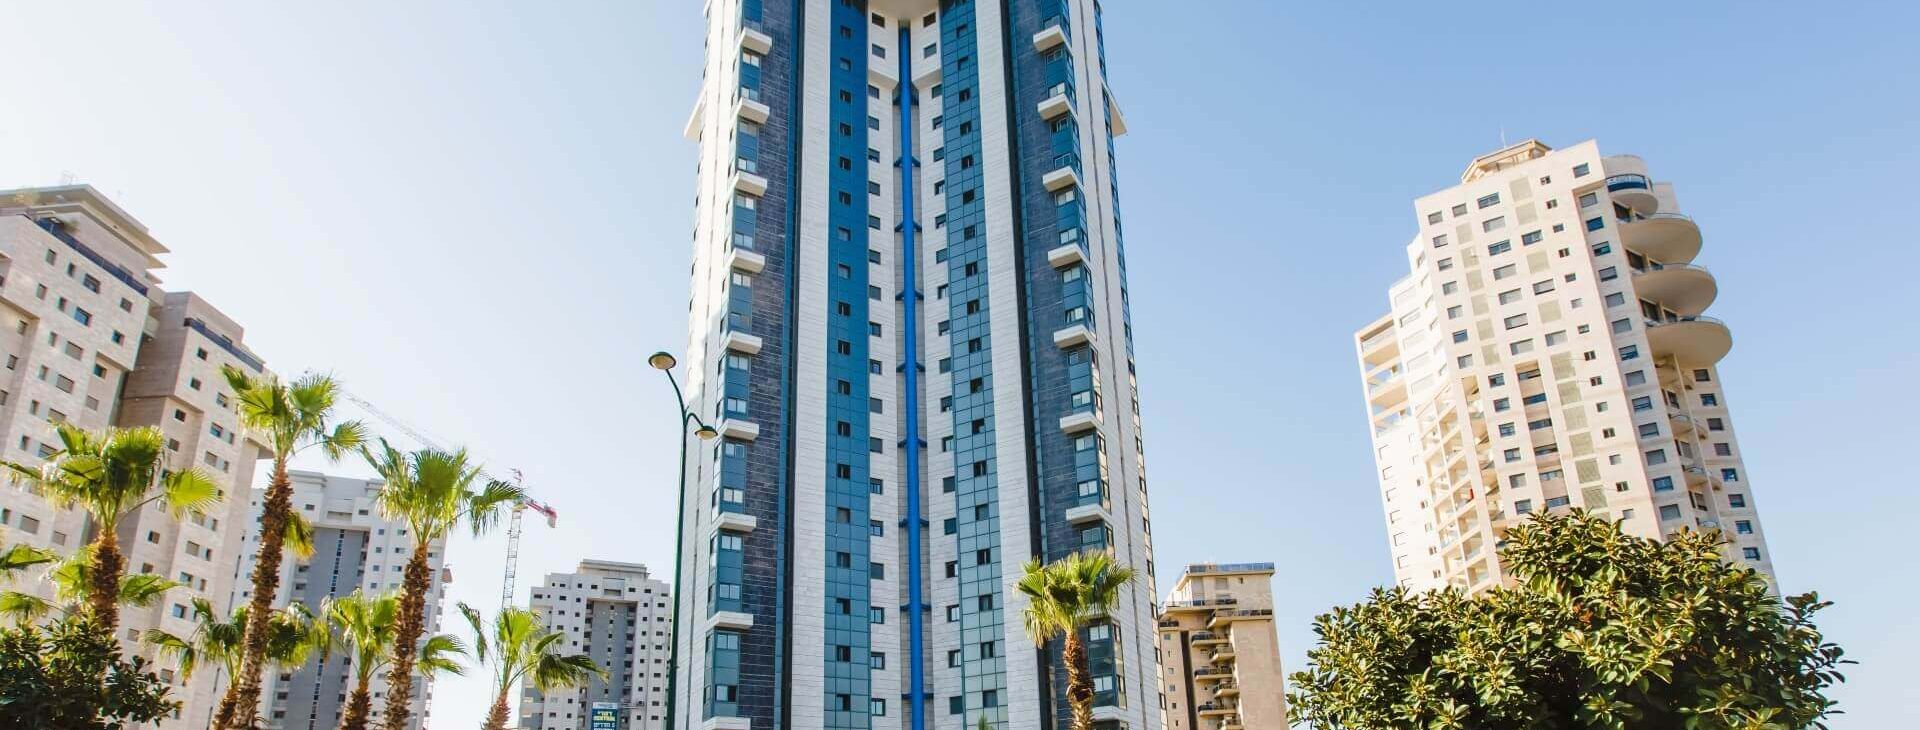 Photo of a building in the SEE UNIK project in Netanya